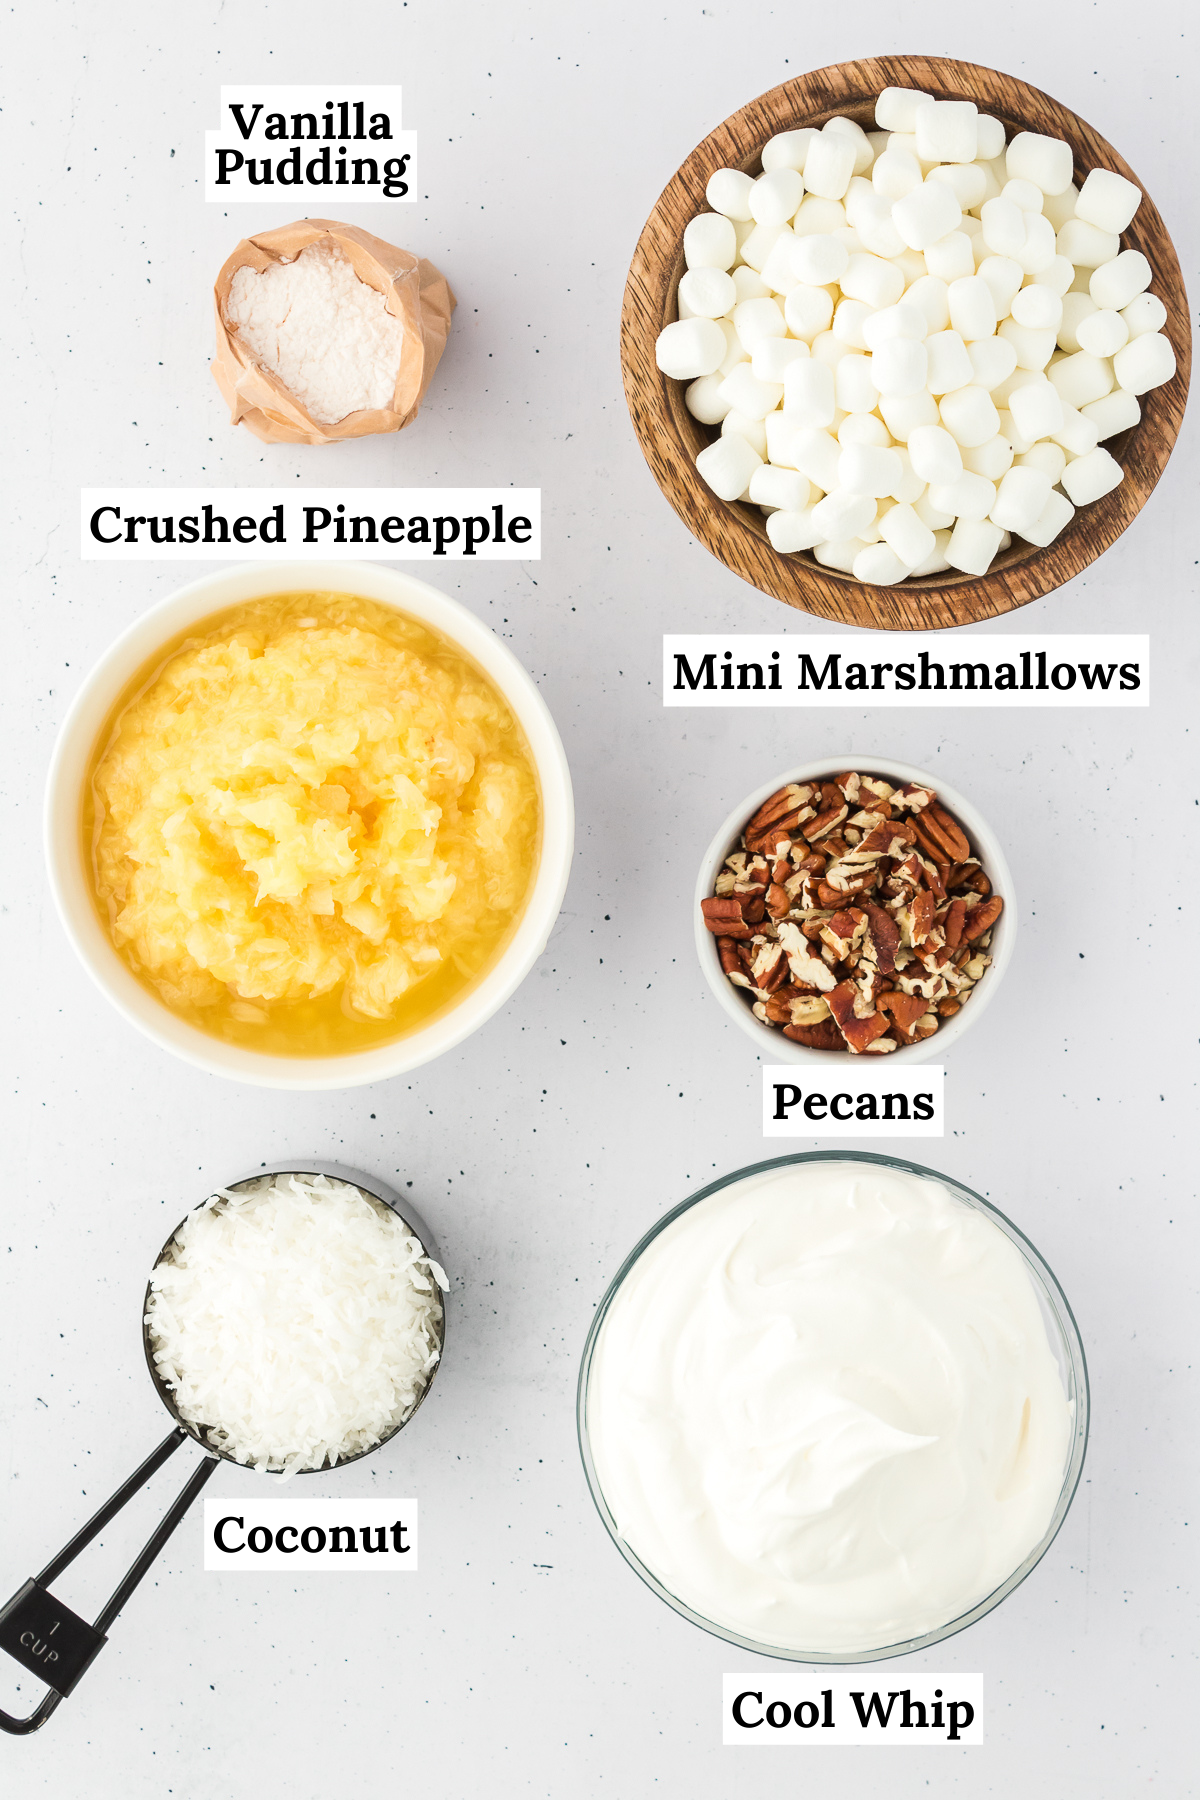 ingredients for pineapple fluff including instant vanilla pudding mix, crushed pineapple, cool whip, mini marshmallows, sweetened shredded coconut, and chopped nuts